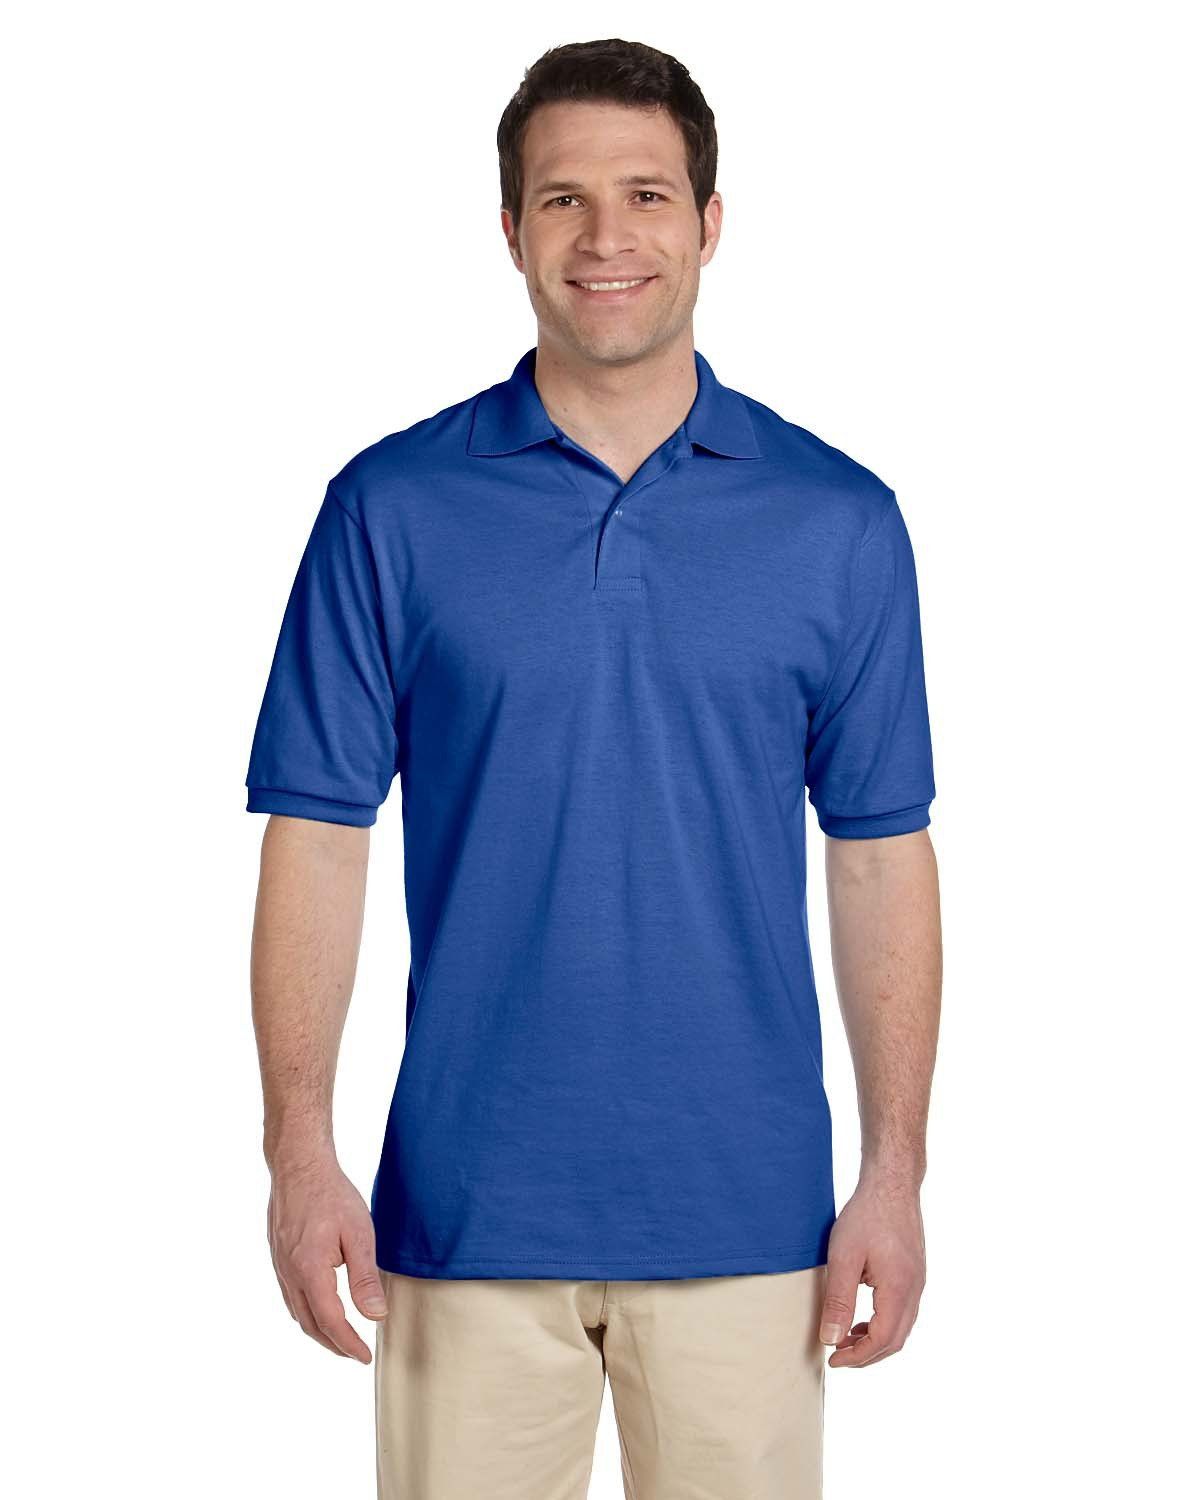 Men's Polo- Spotshield Jersey sport repels water and oil-based stains